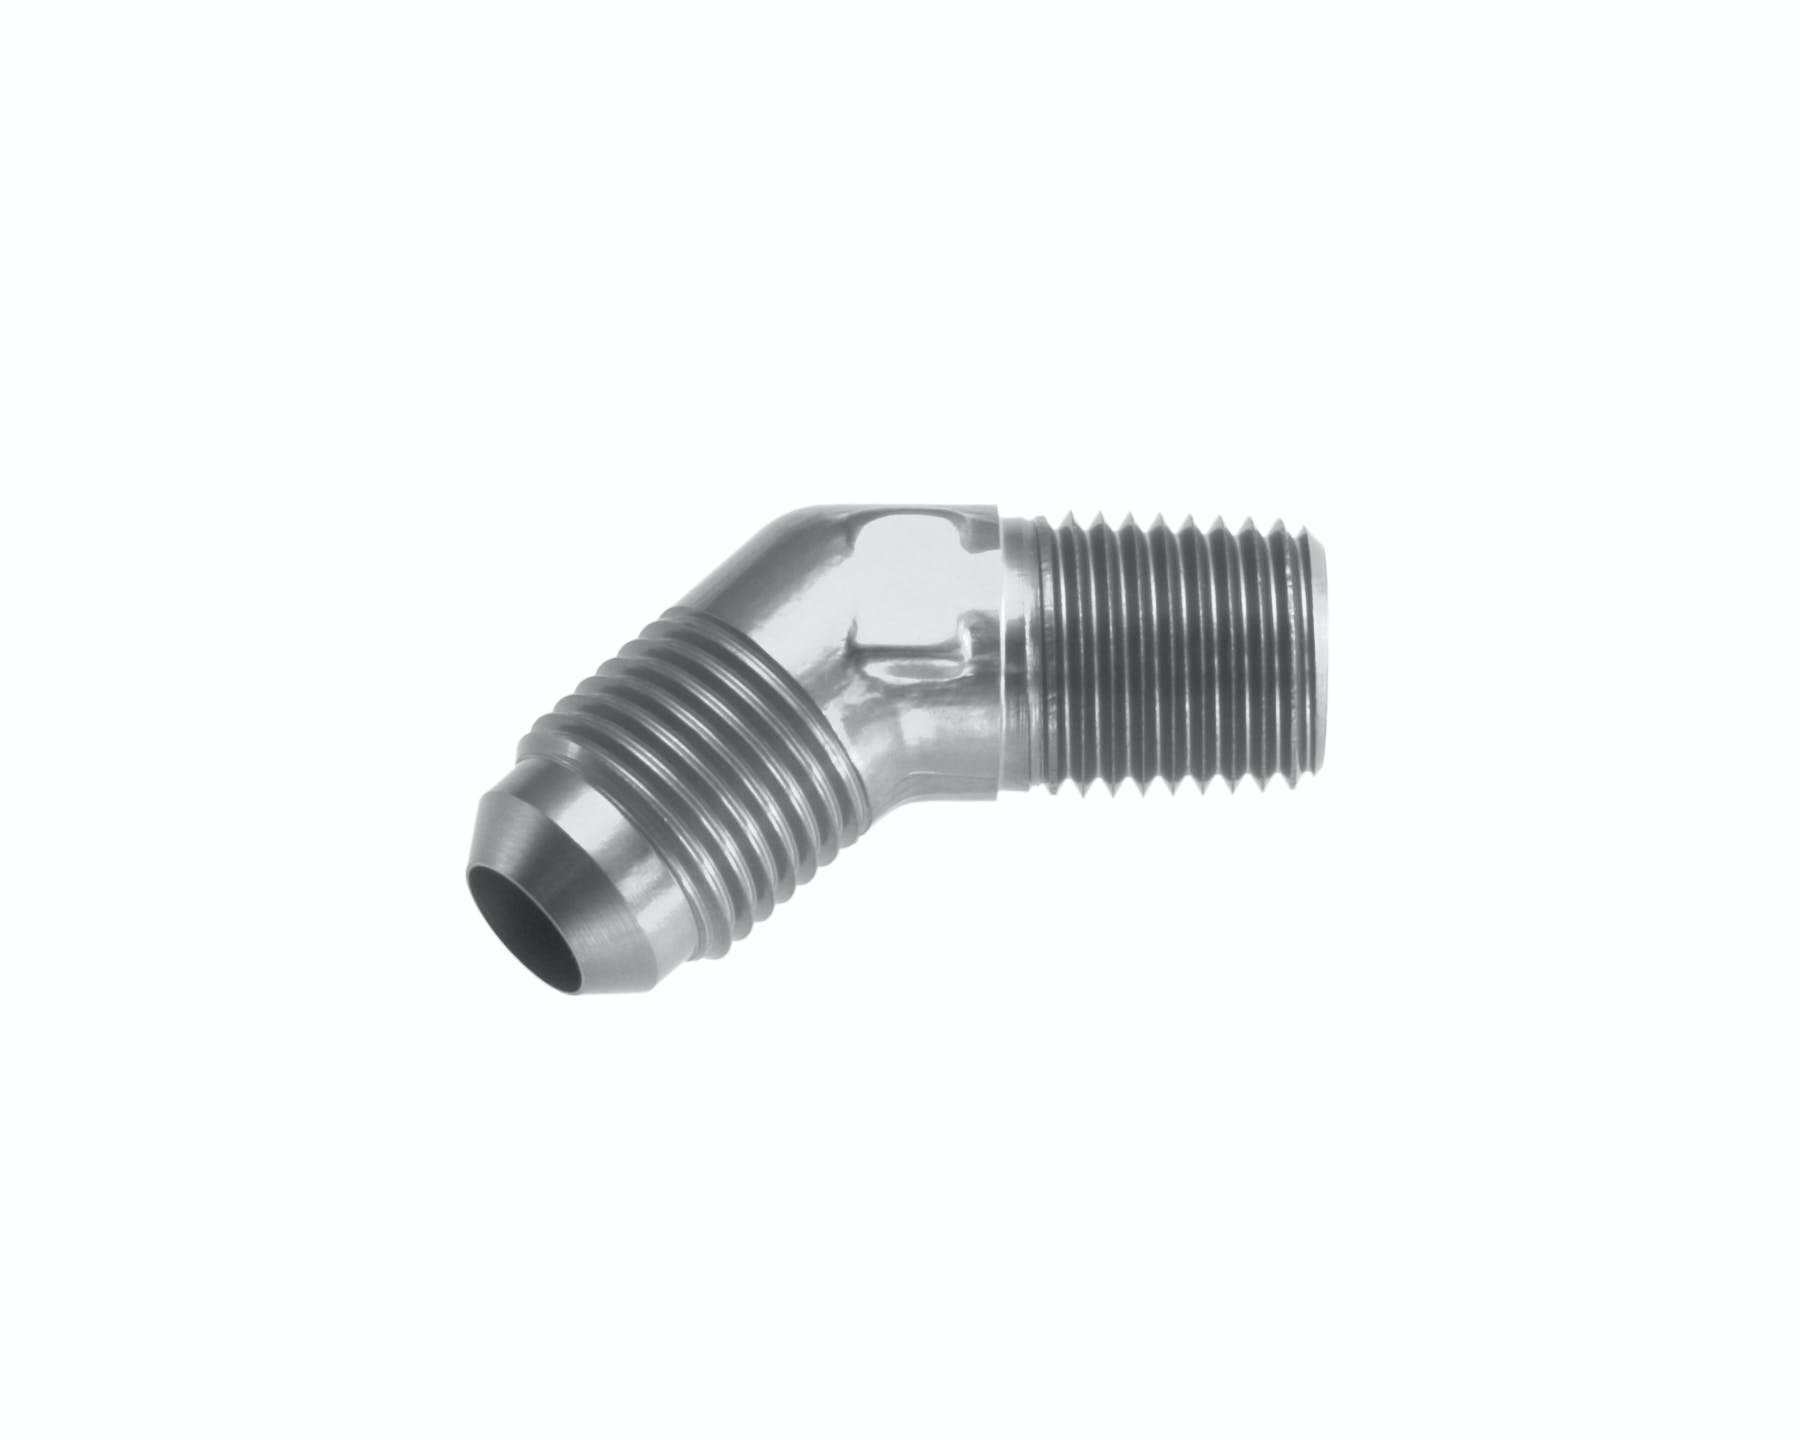 Redhorse Performance 823-08-06-5 -08 45 degree Male adapter to -06 (3/8in) NPT Male - clear